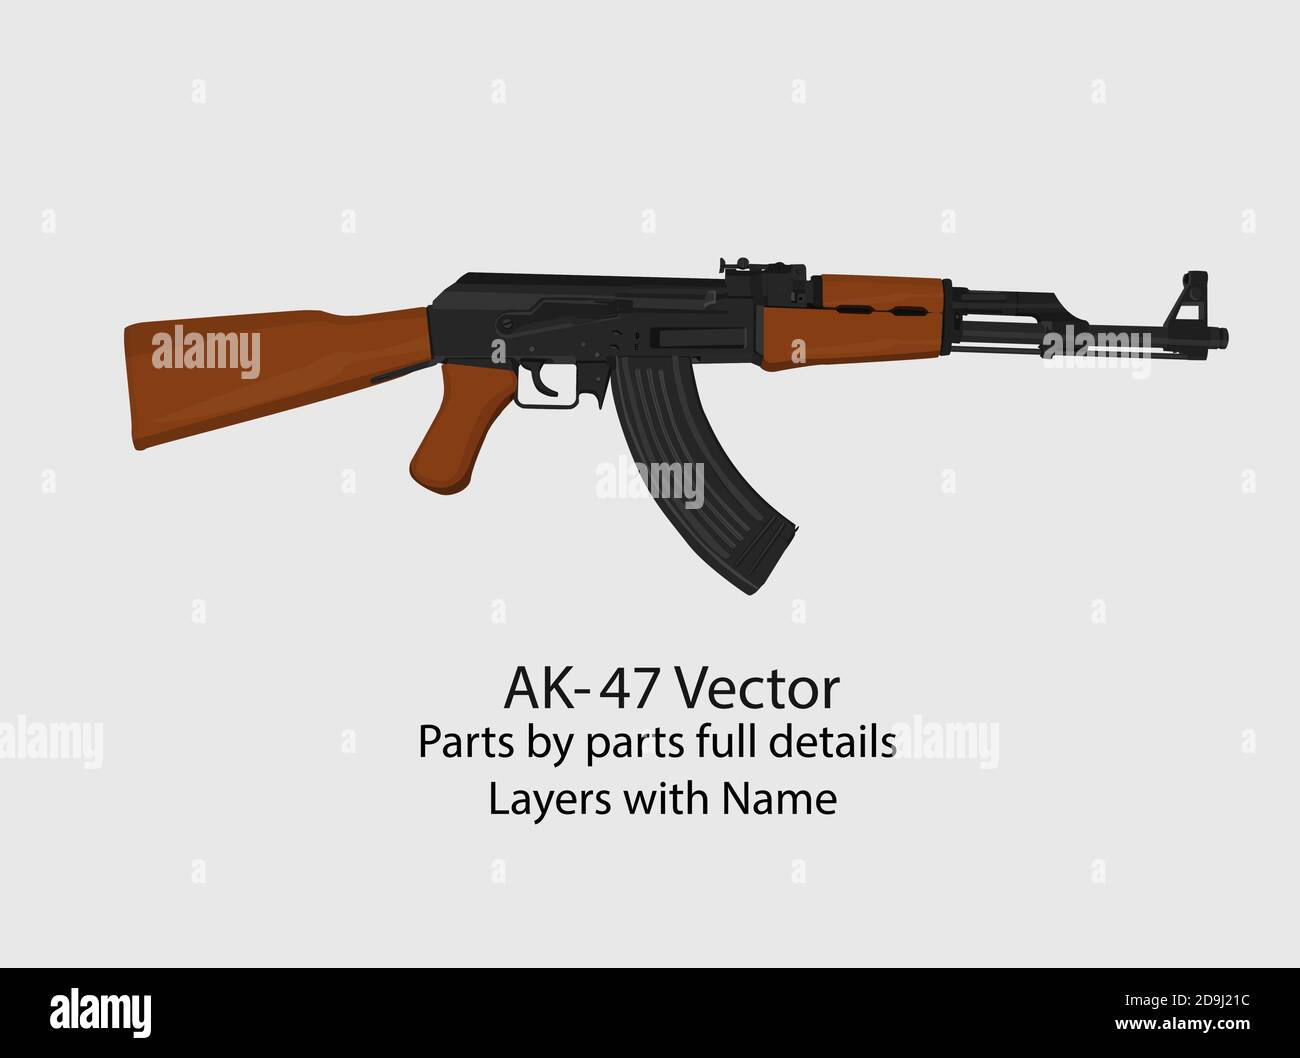 Ak 47 Cliparts, Stock Vector and Royalty Free Ak 47 Illustrations